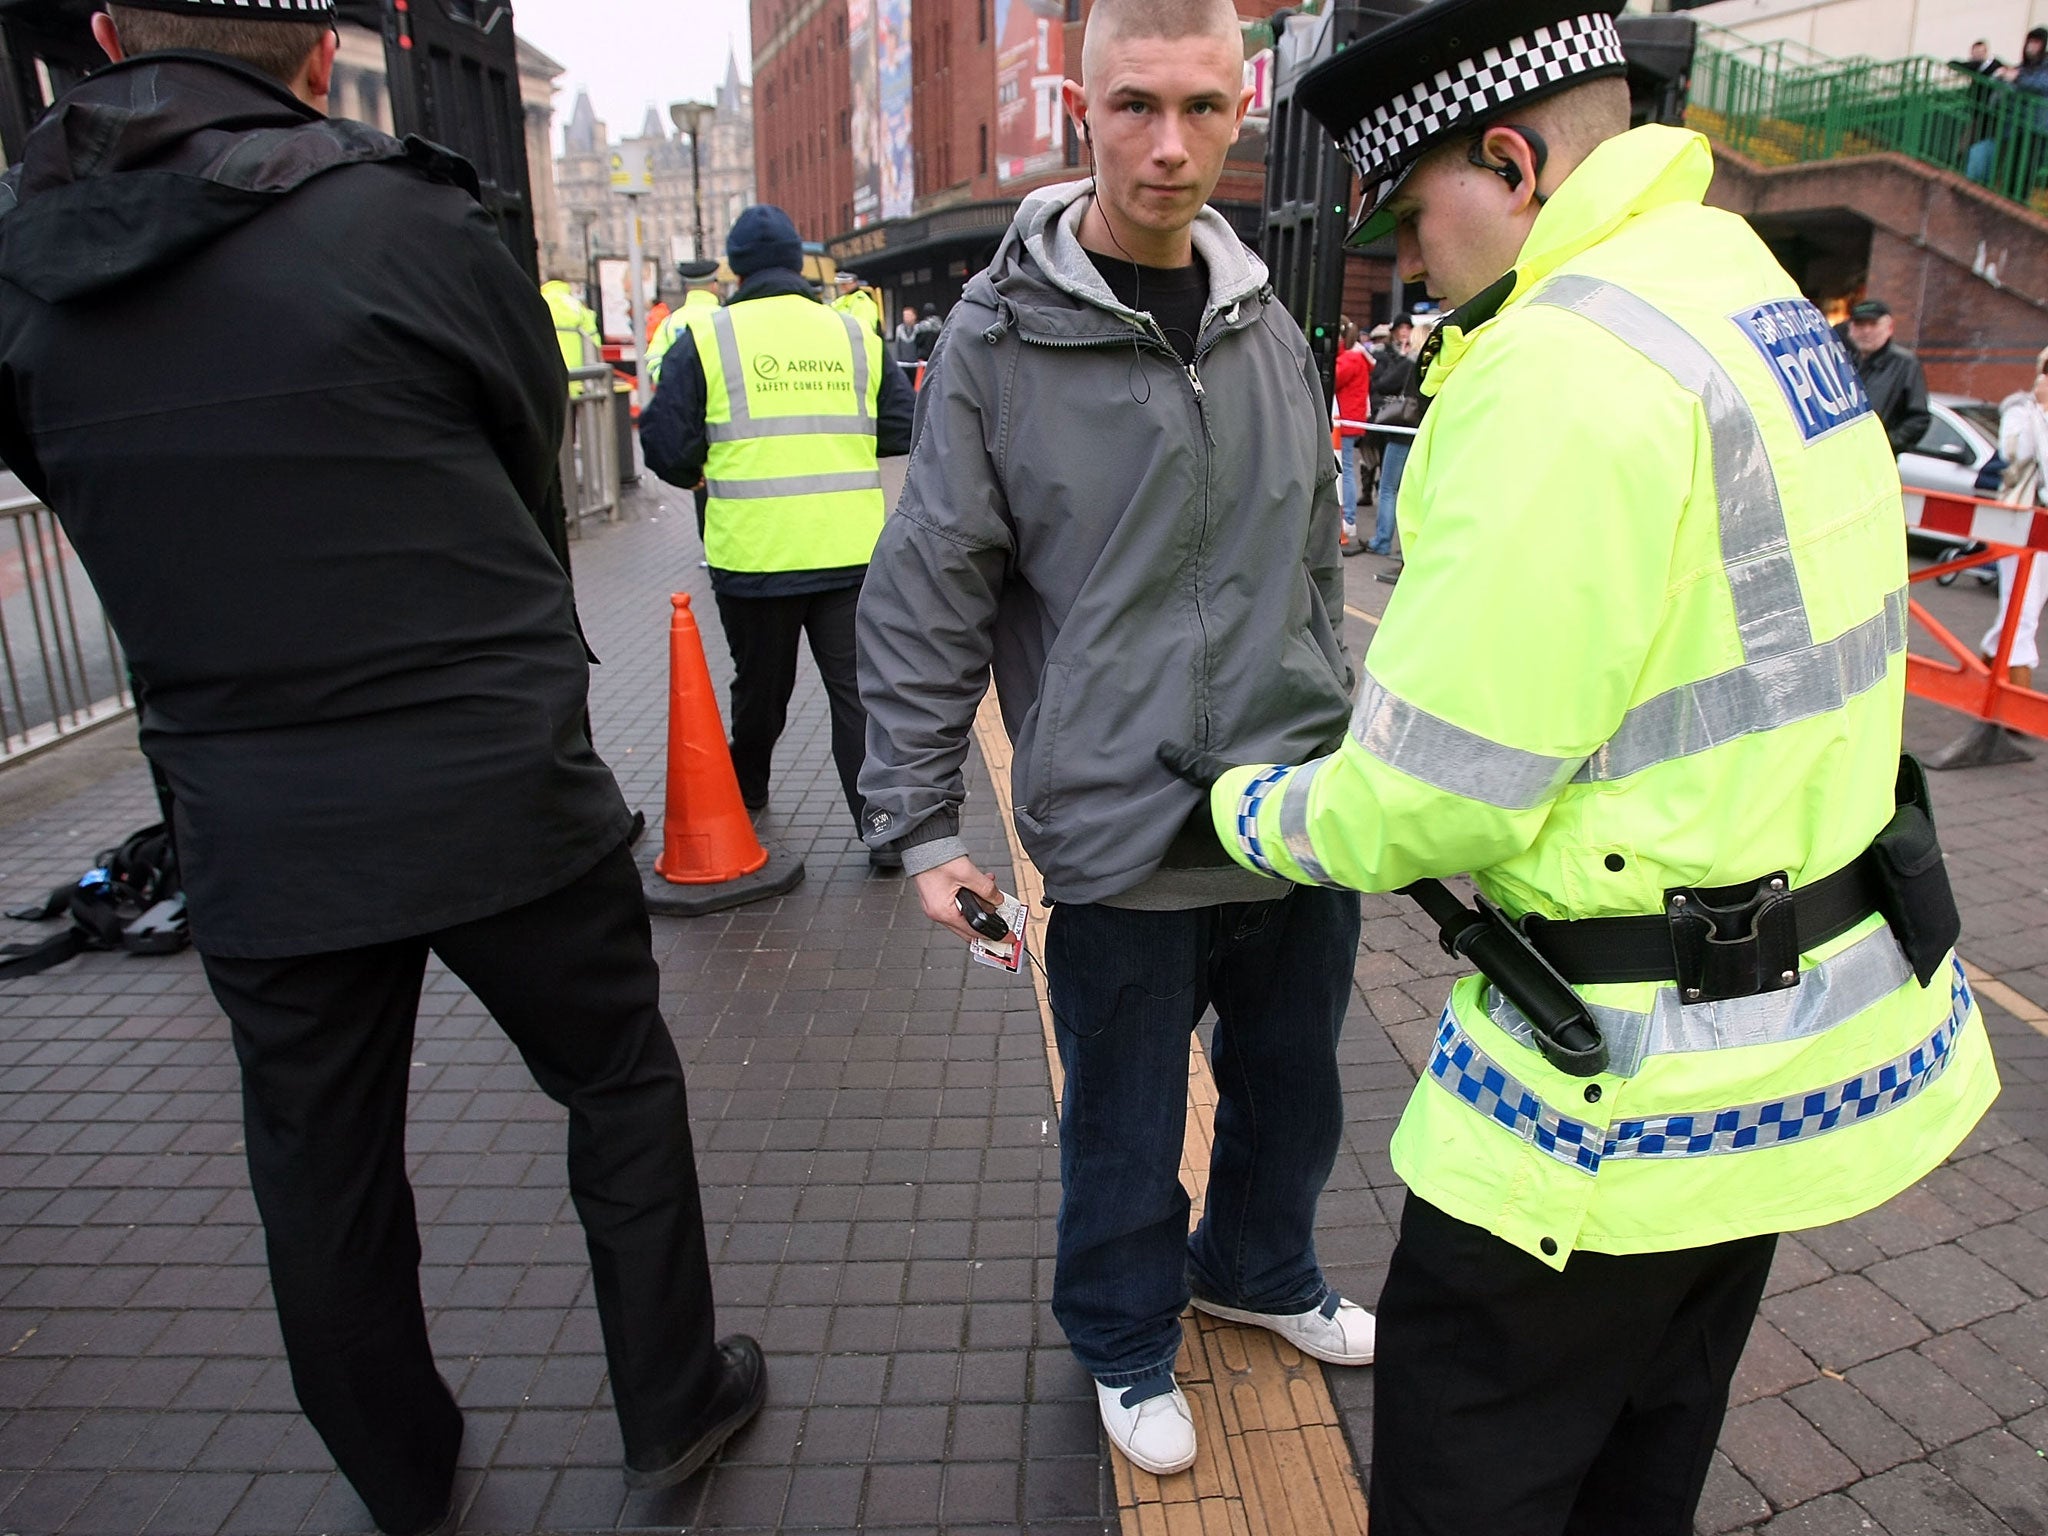 Drug searches are responsible for more than 50 per cent of all stop-and-search operations